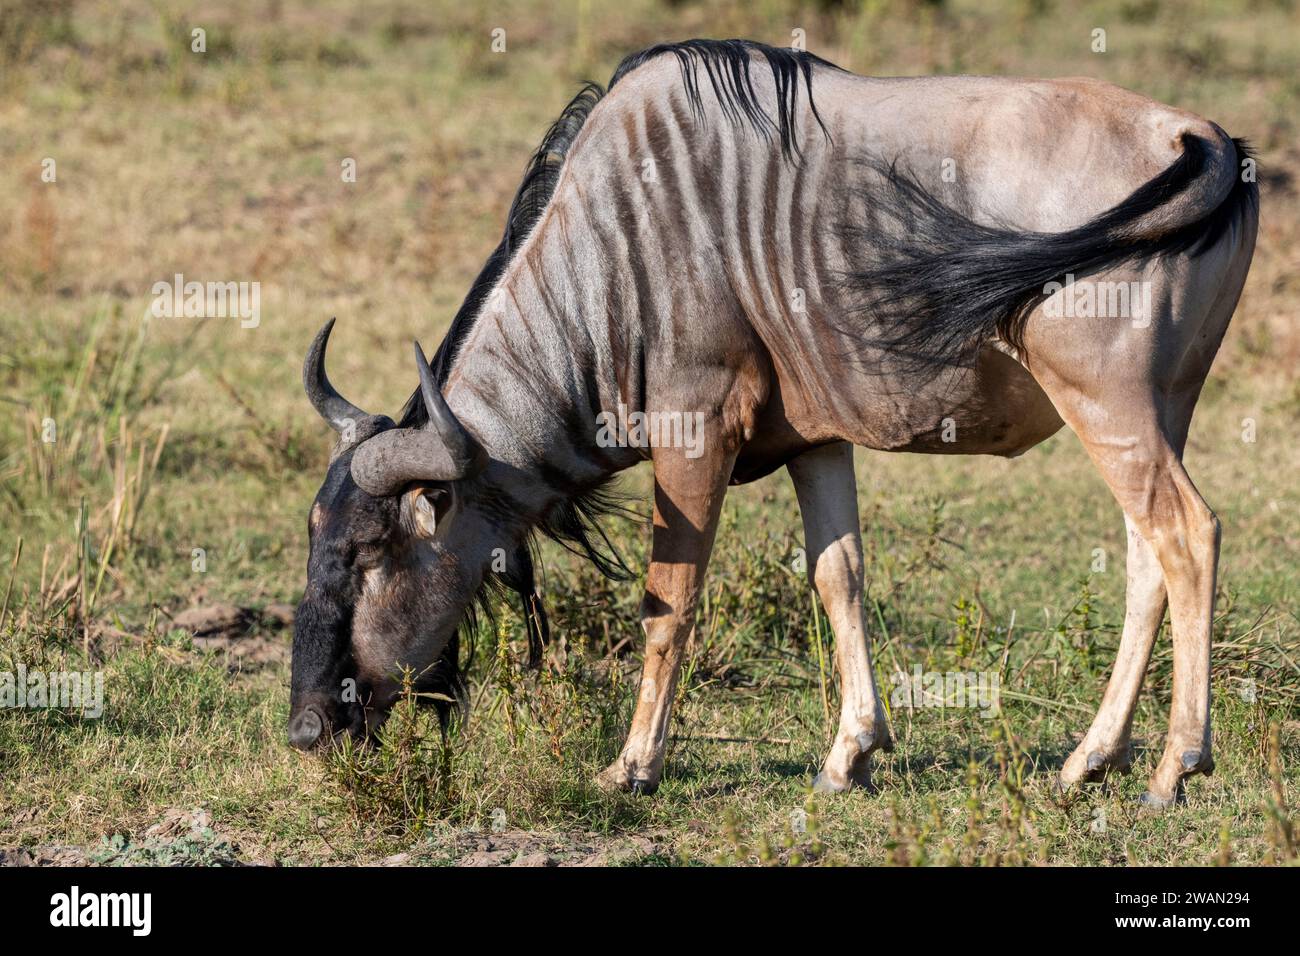 Africa, Zambia, South Luangwa. Cookson's wildebeest (Connochaetes taurinus cooksoni) subspecies of the blue wildebeest. Endemic to southern Africa. Stock Photo